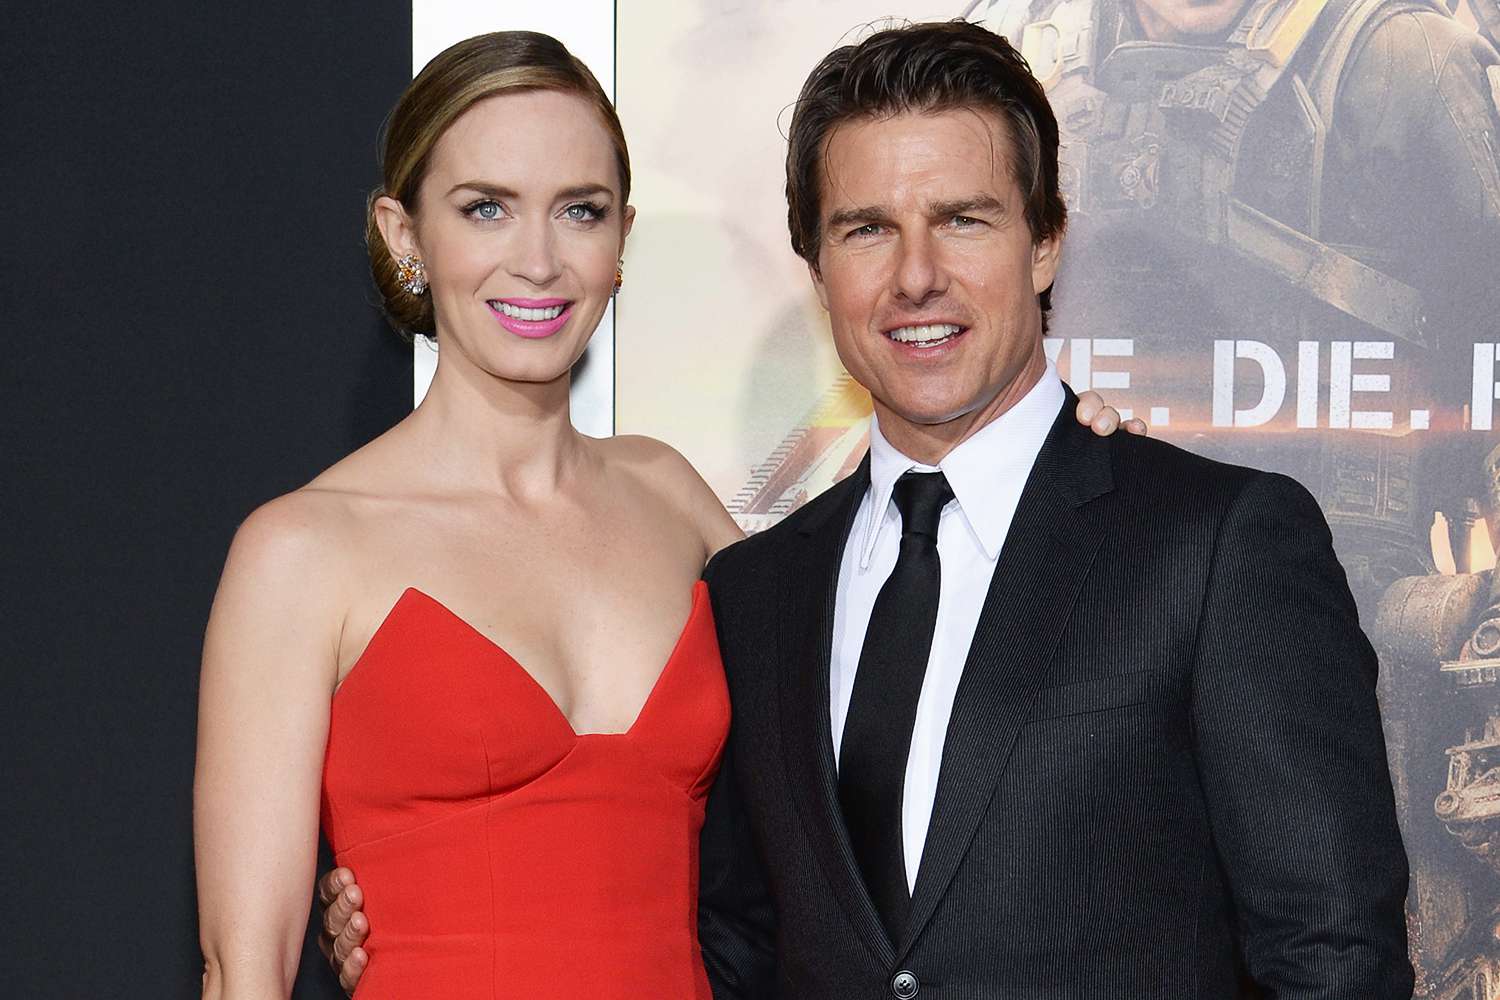 Tom Cruise Marks 10 Years Since 'Edge of Tomorrow' with 'Great Friend' Emily Blunt: 'Incredible Memories'